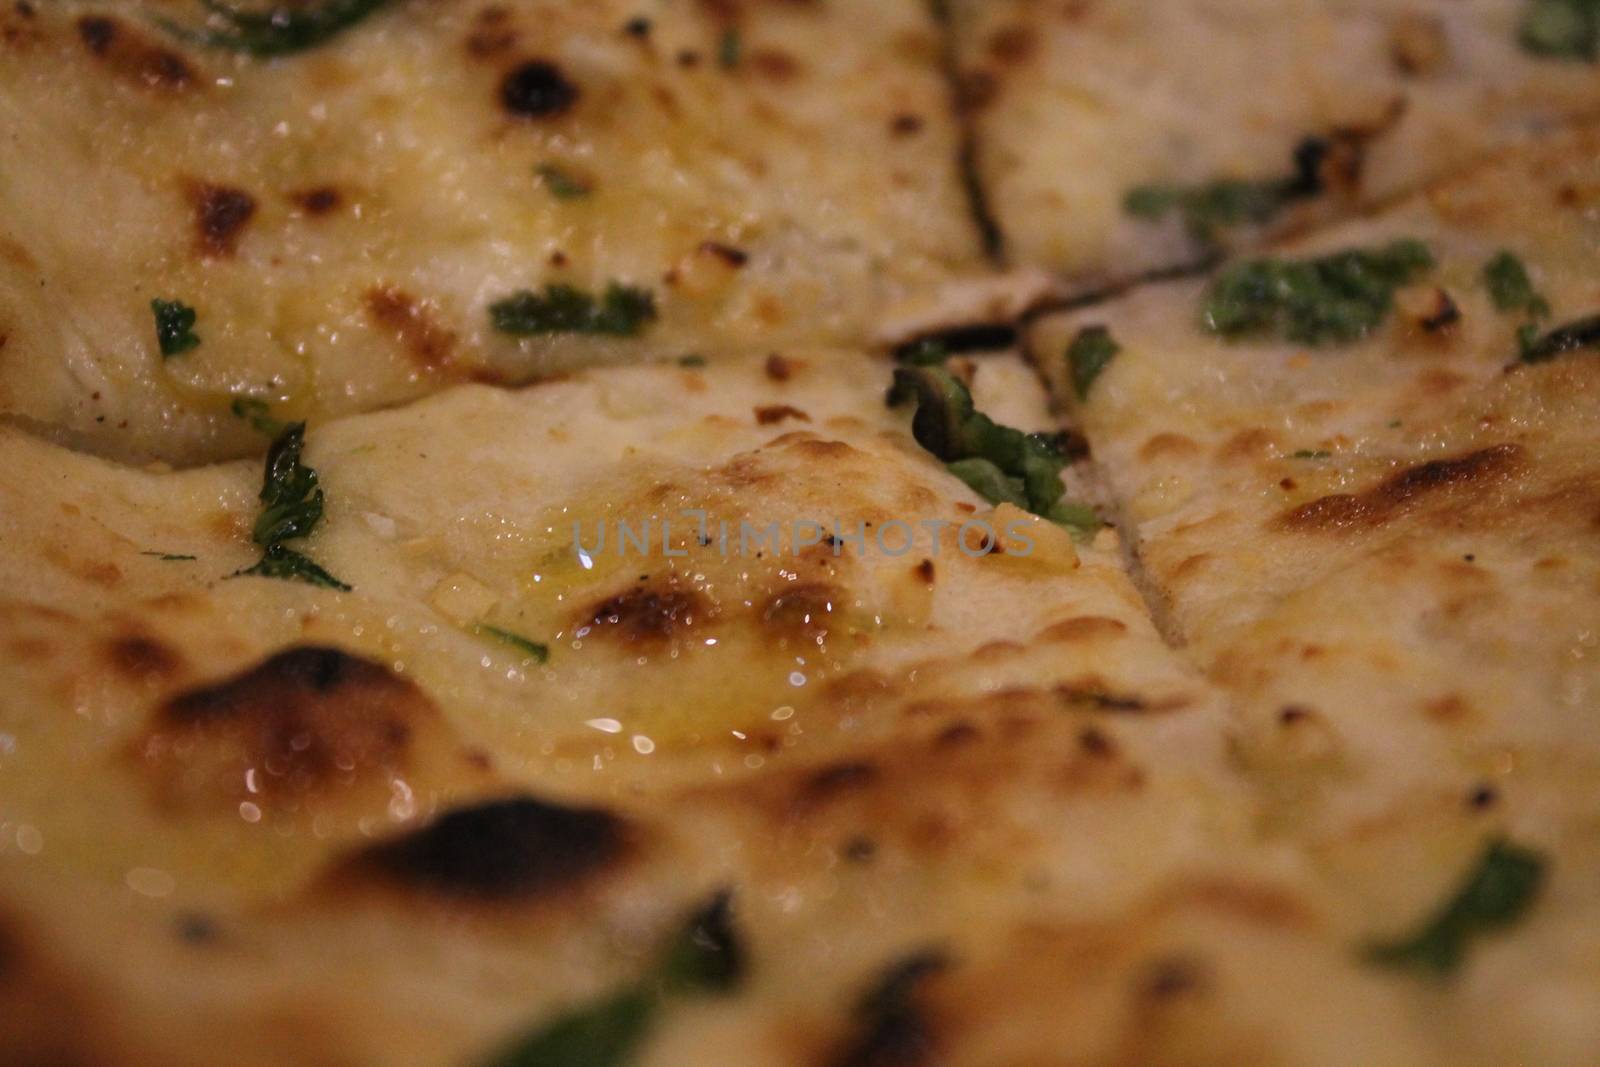 Typical Indian naan bread with garlic